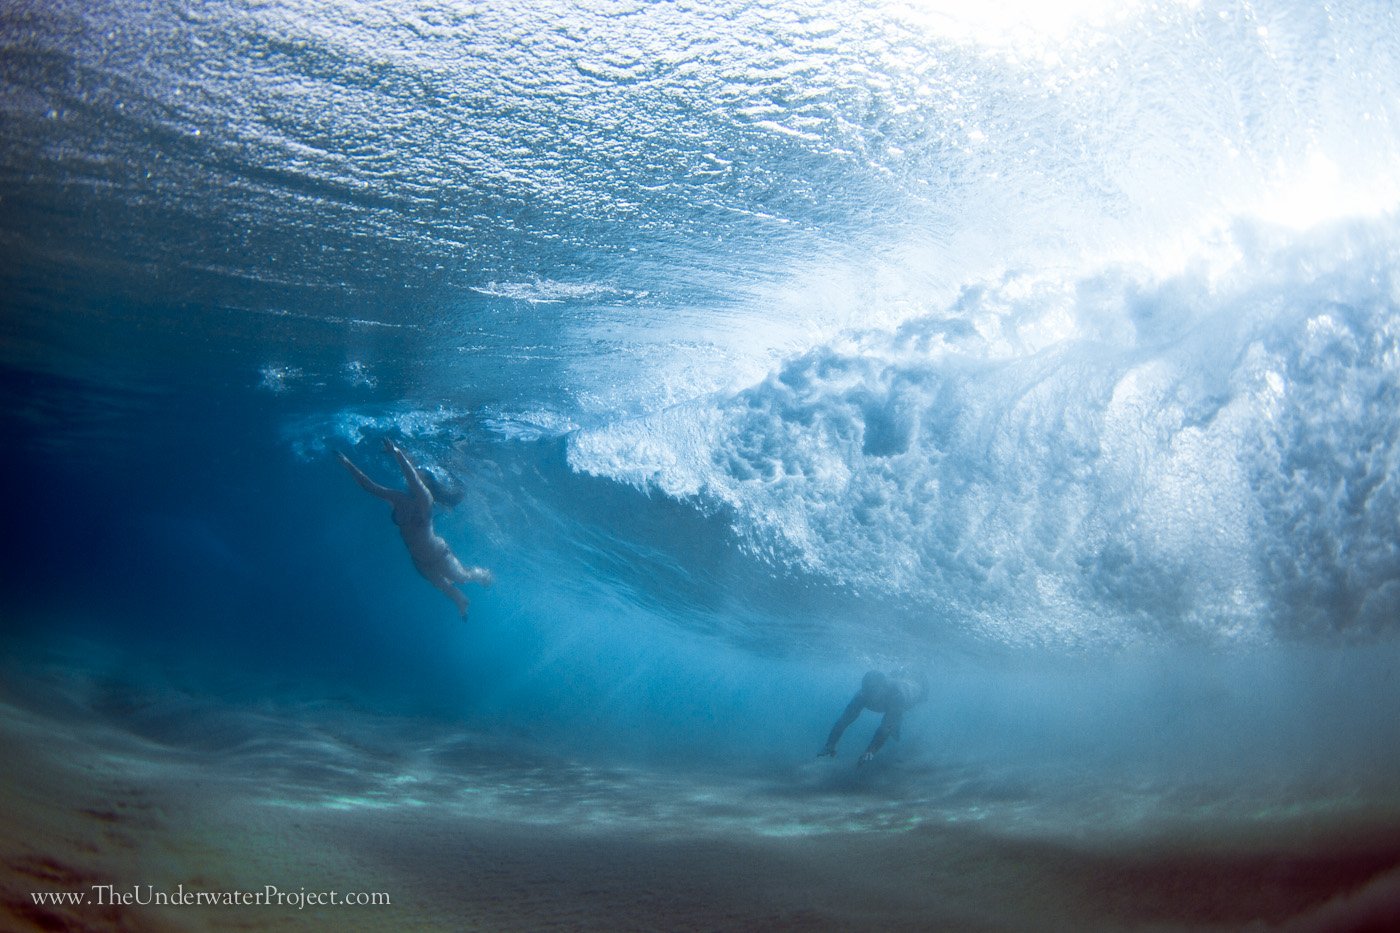 Mark Tipple's Underwater Photography Documents a Different Side of Surf